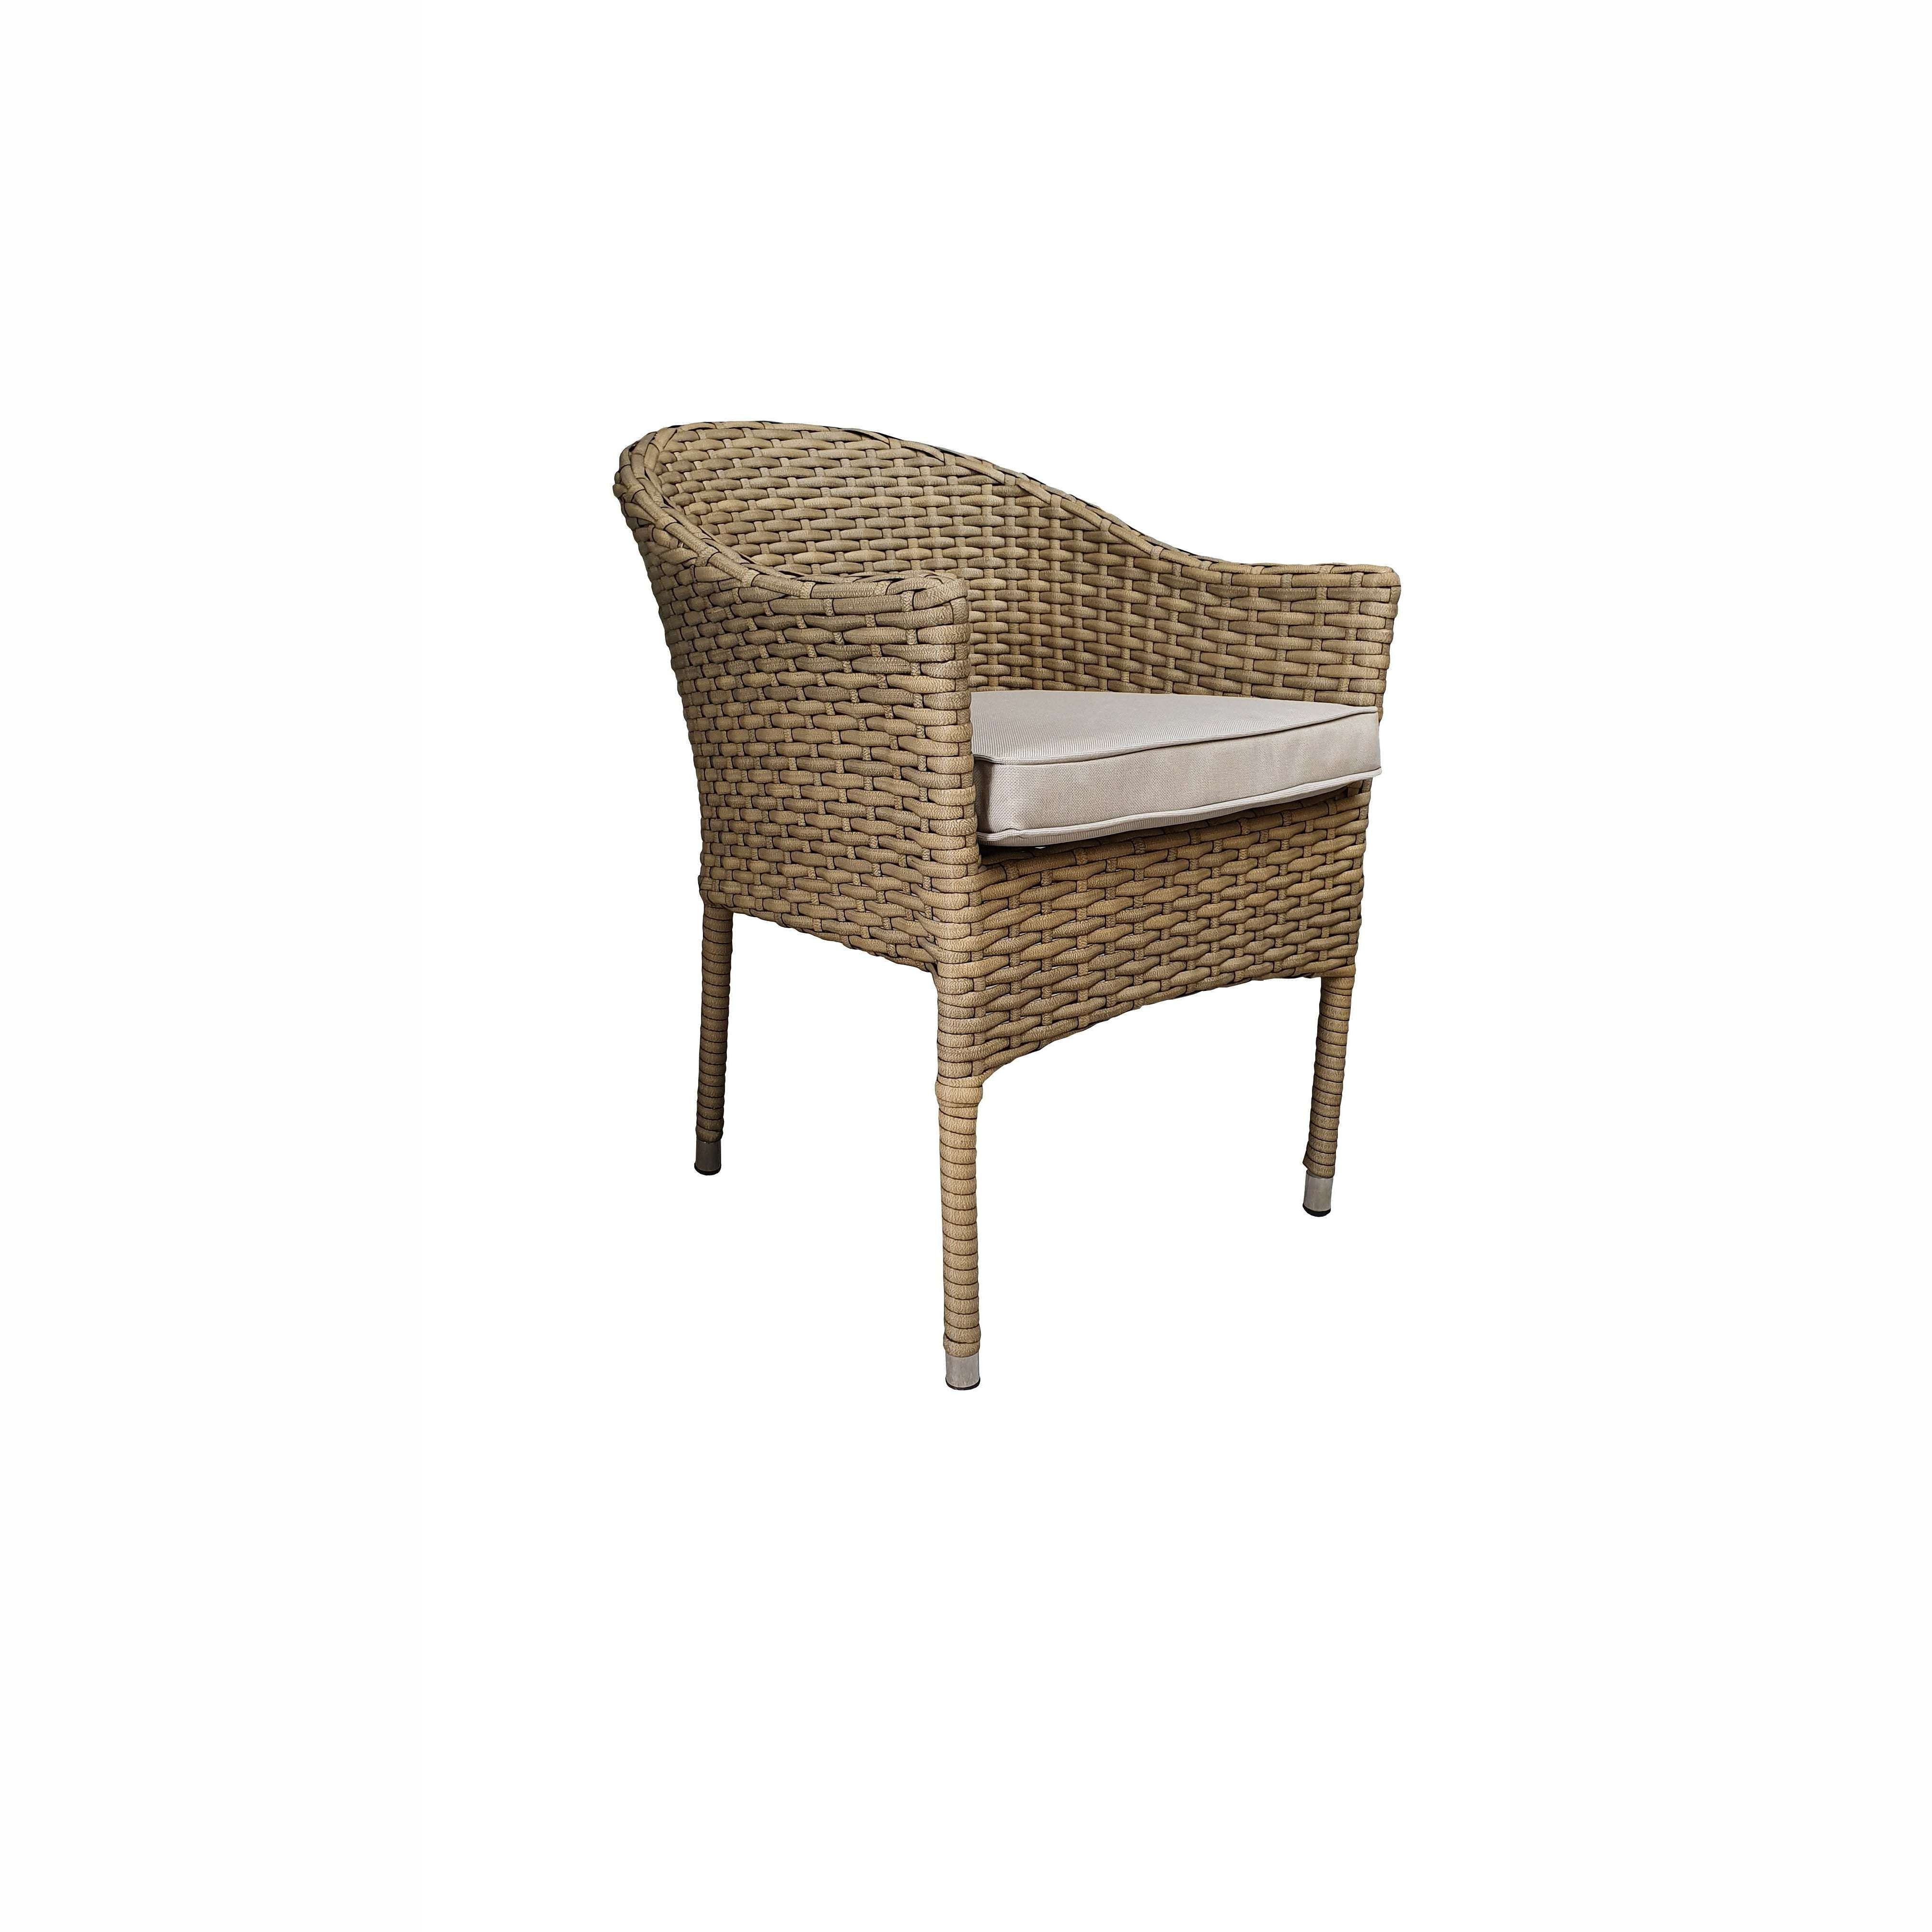 Exceptional Garden:Signature Weave Darcey Stacking Chairs